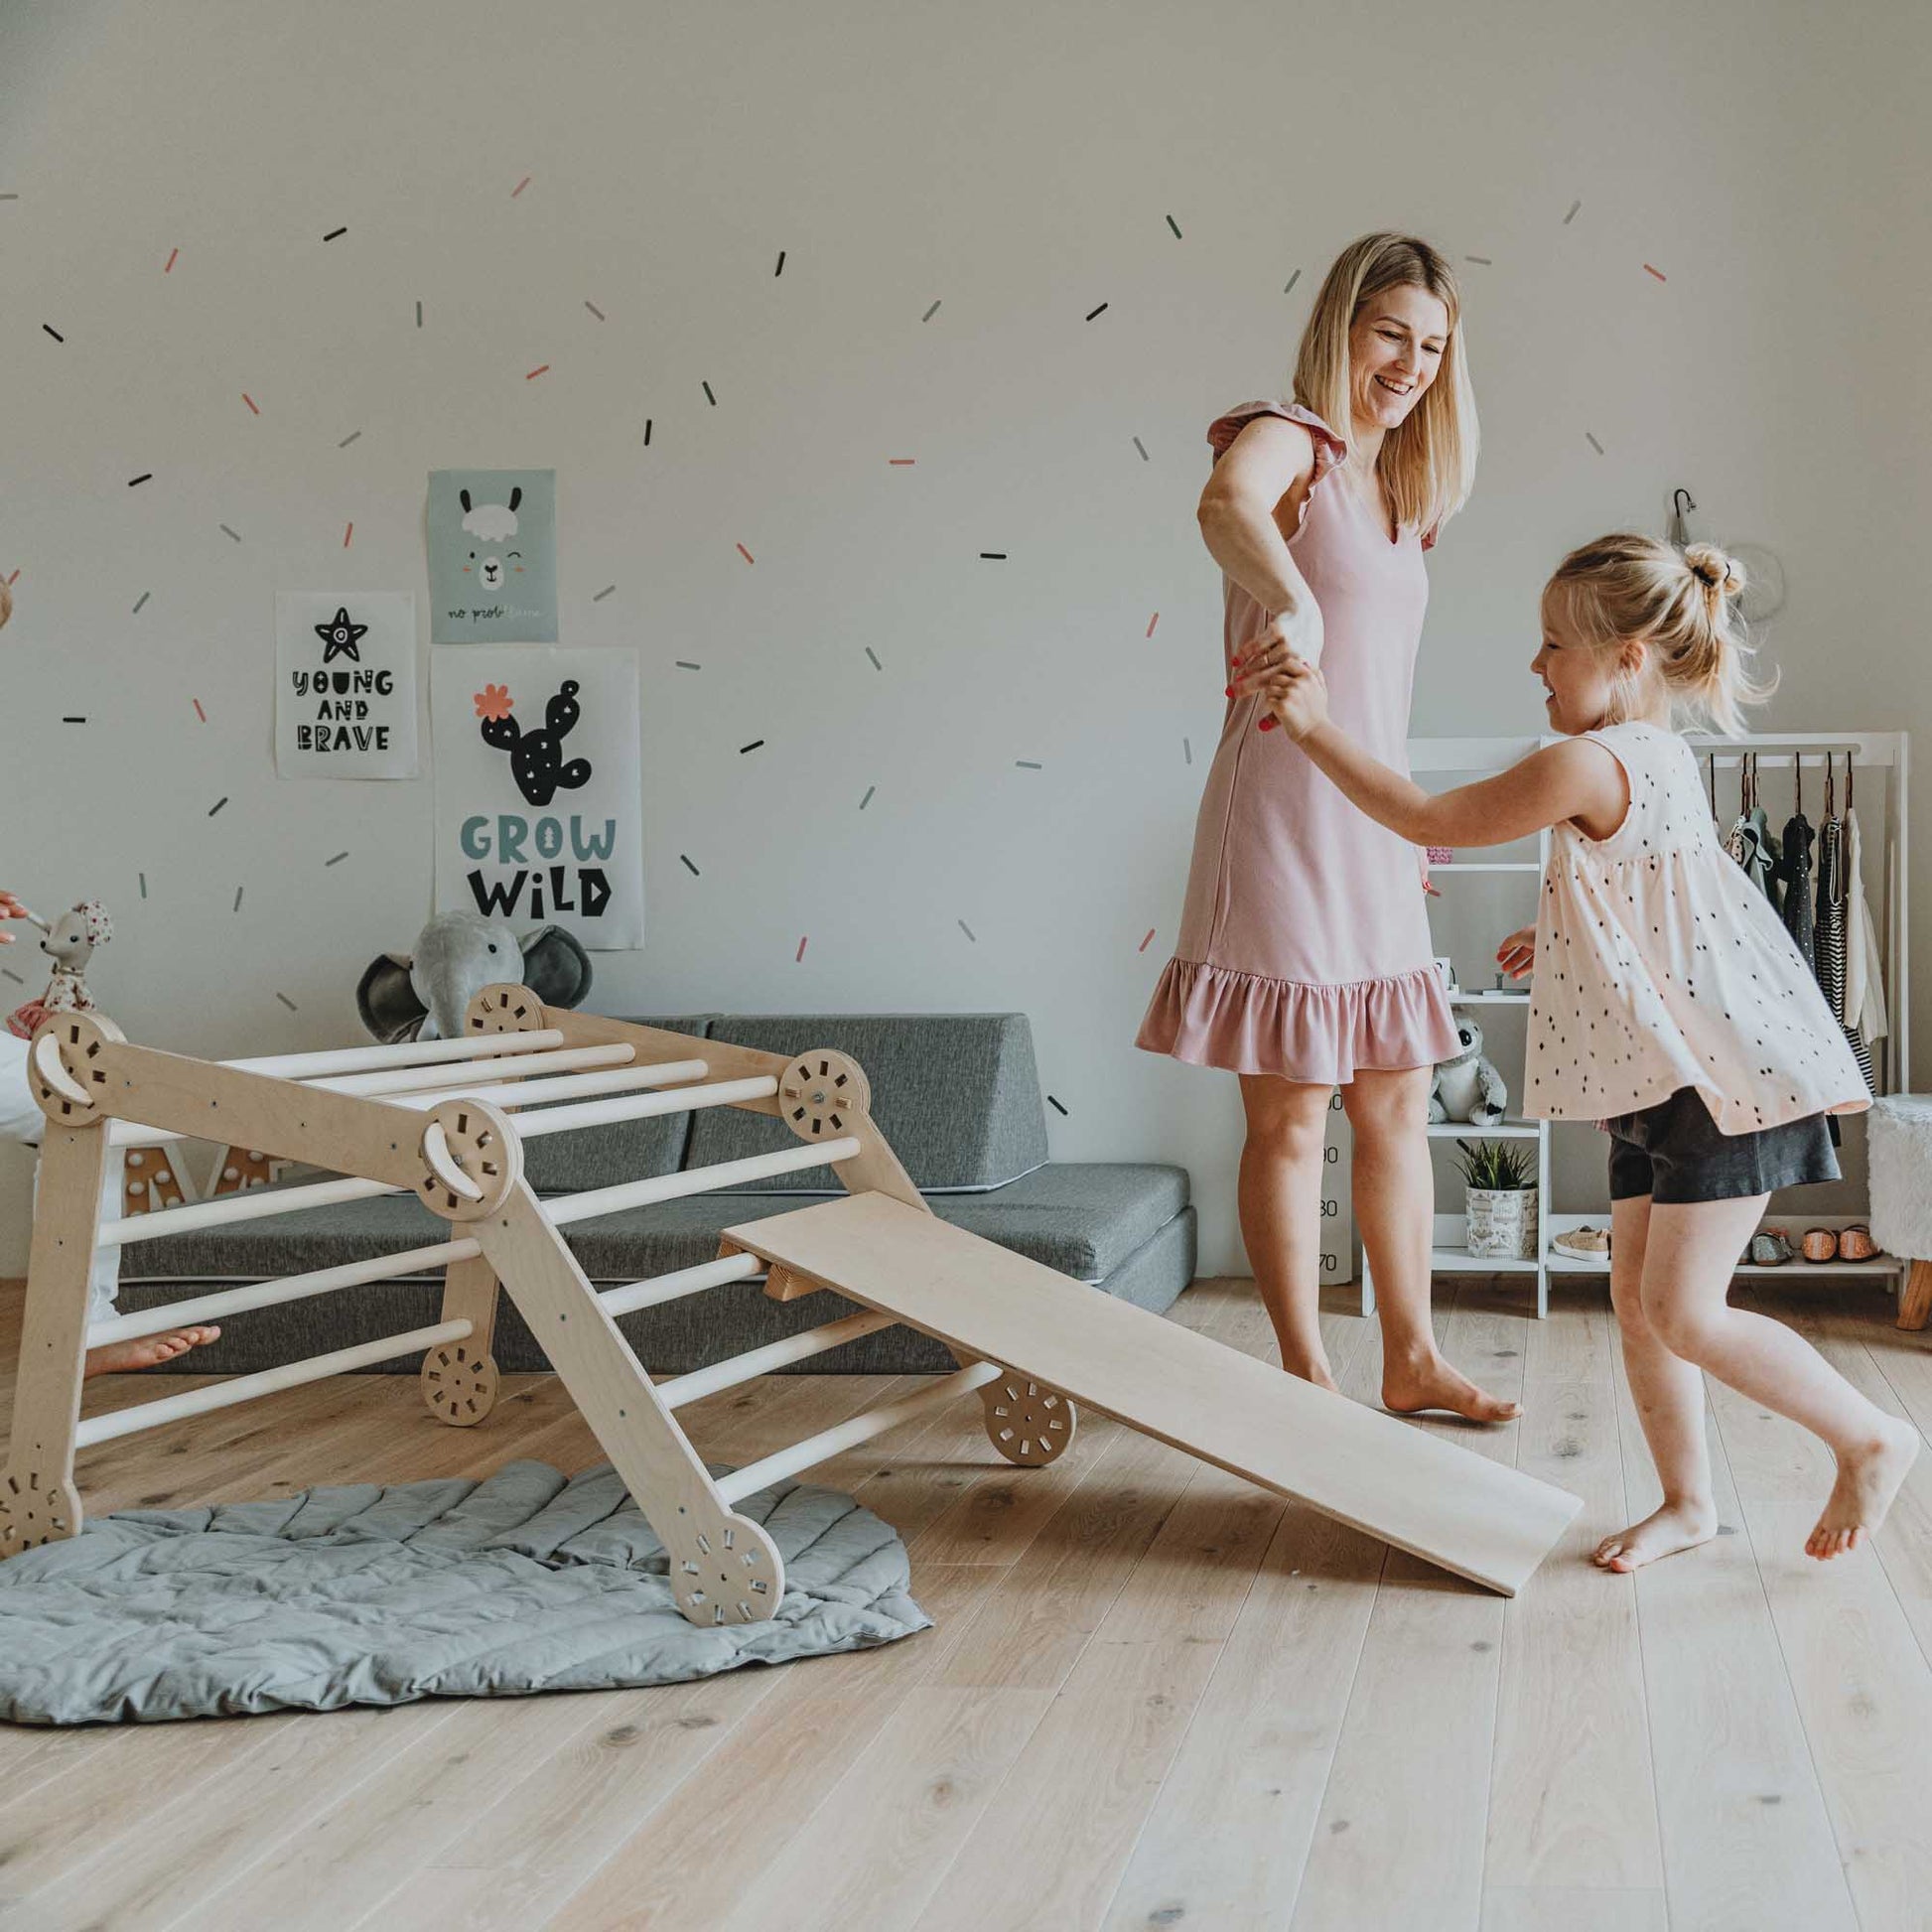 A woman and her daughter play with a transformable climbing gym in a living room.